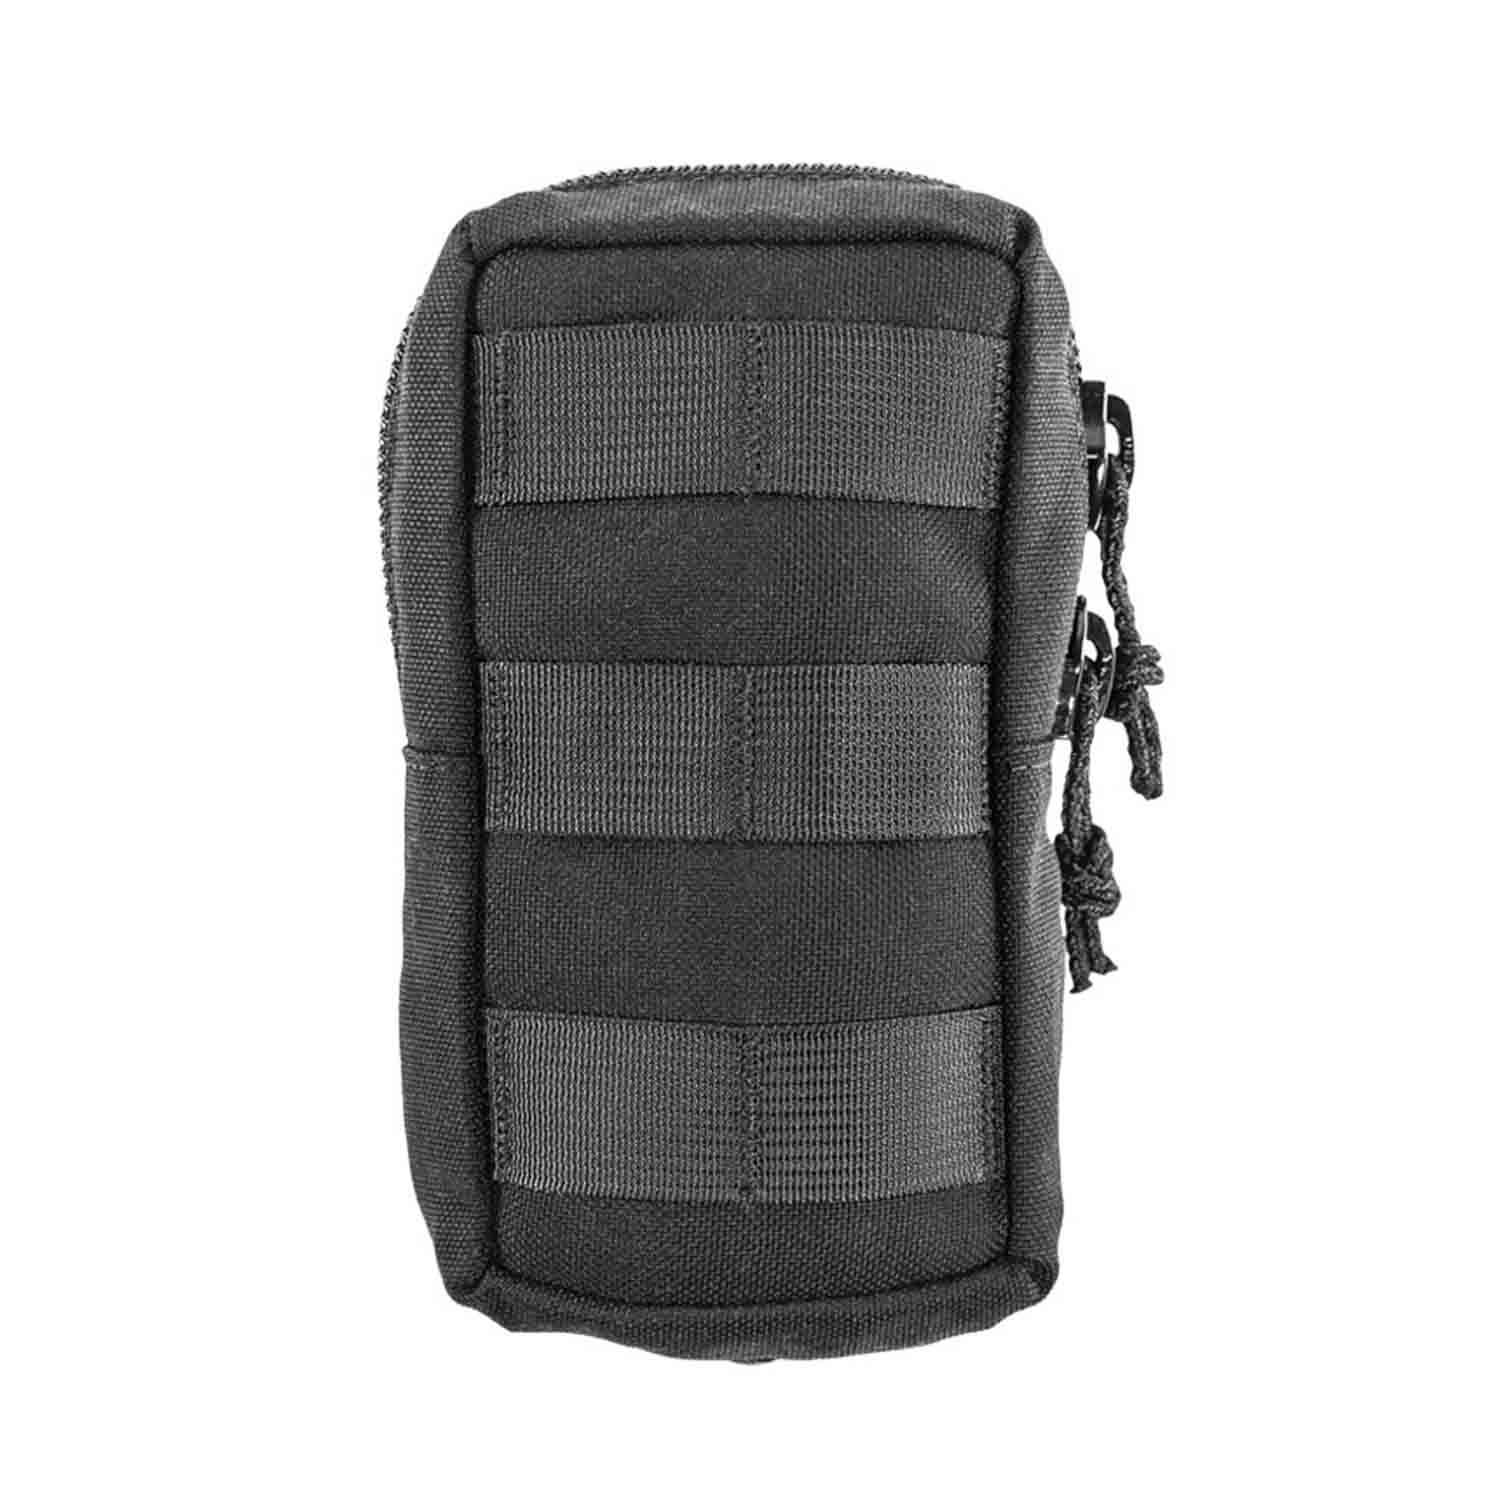 New Ex Police Black Molle Pouch 966. 